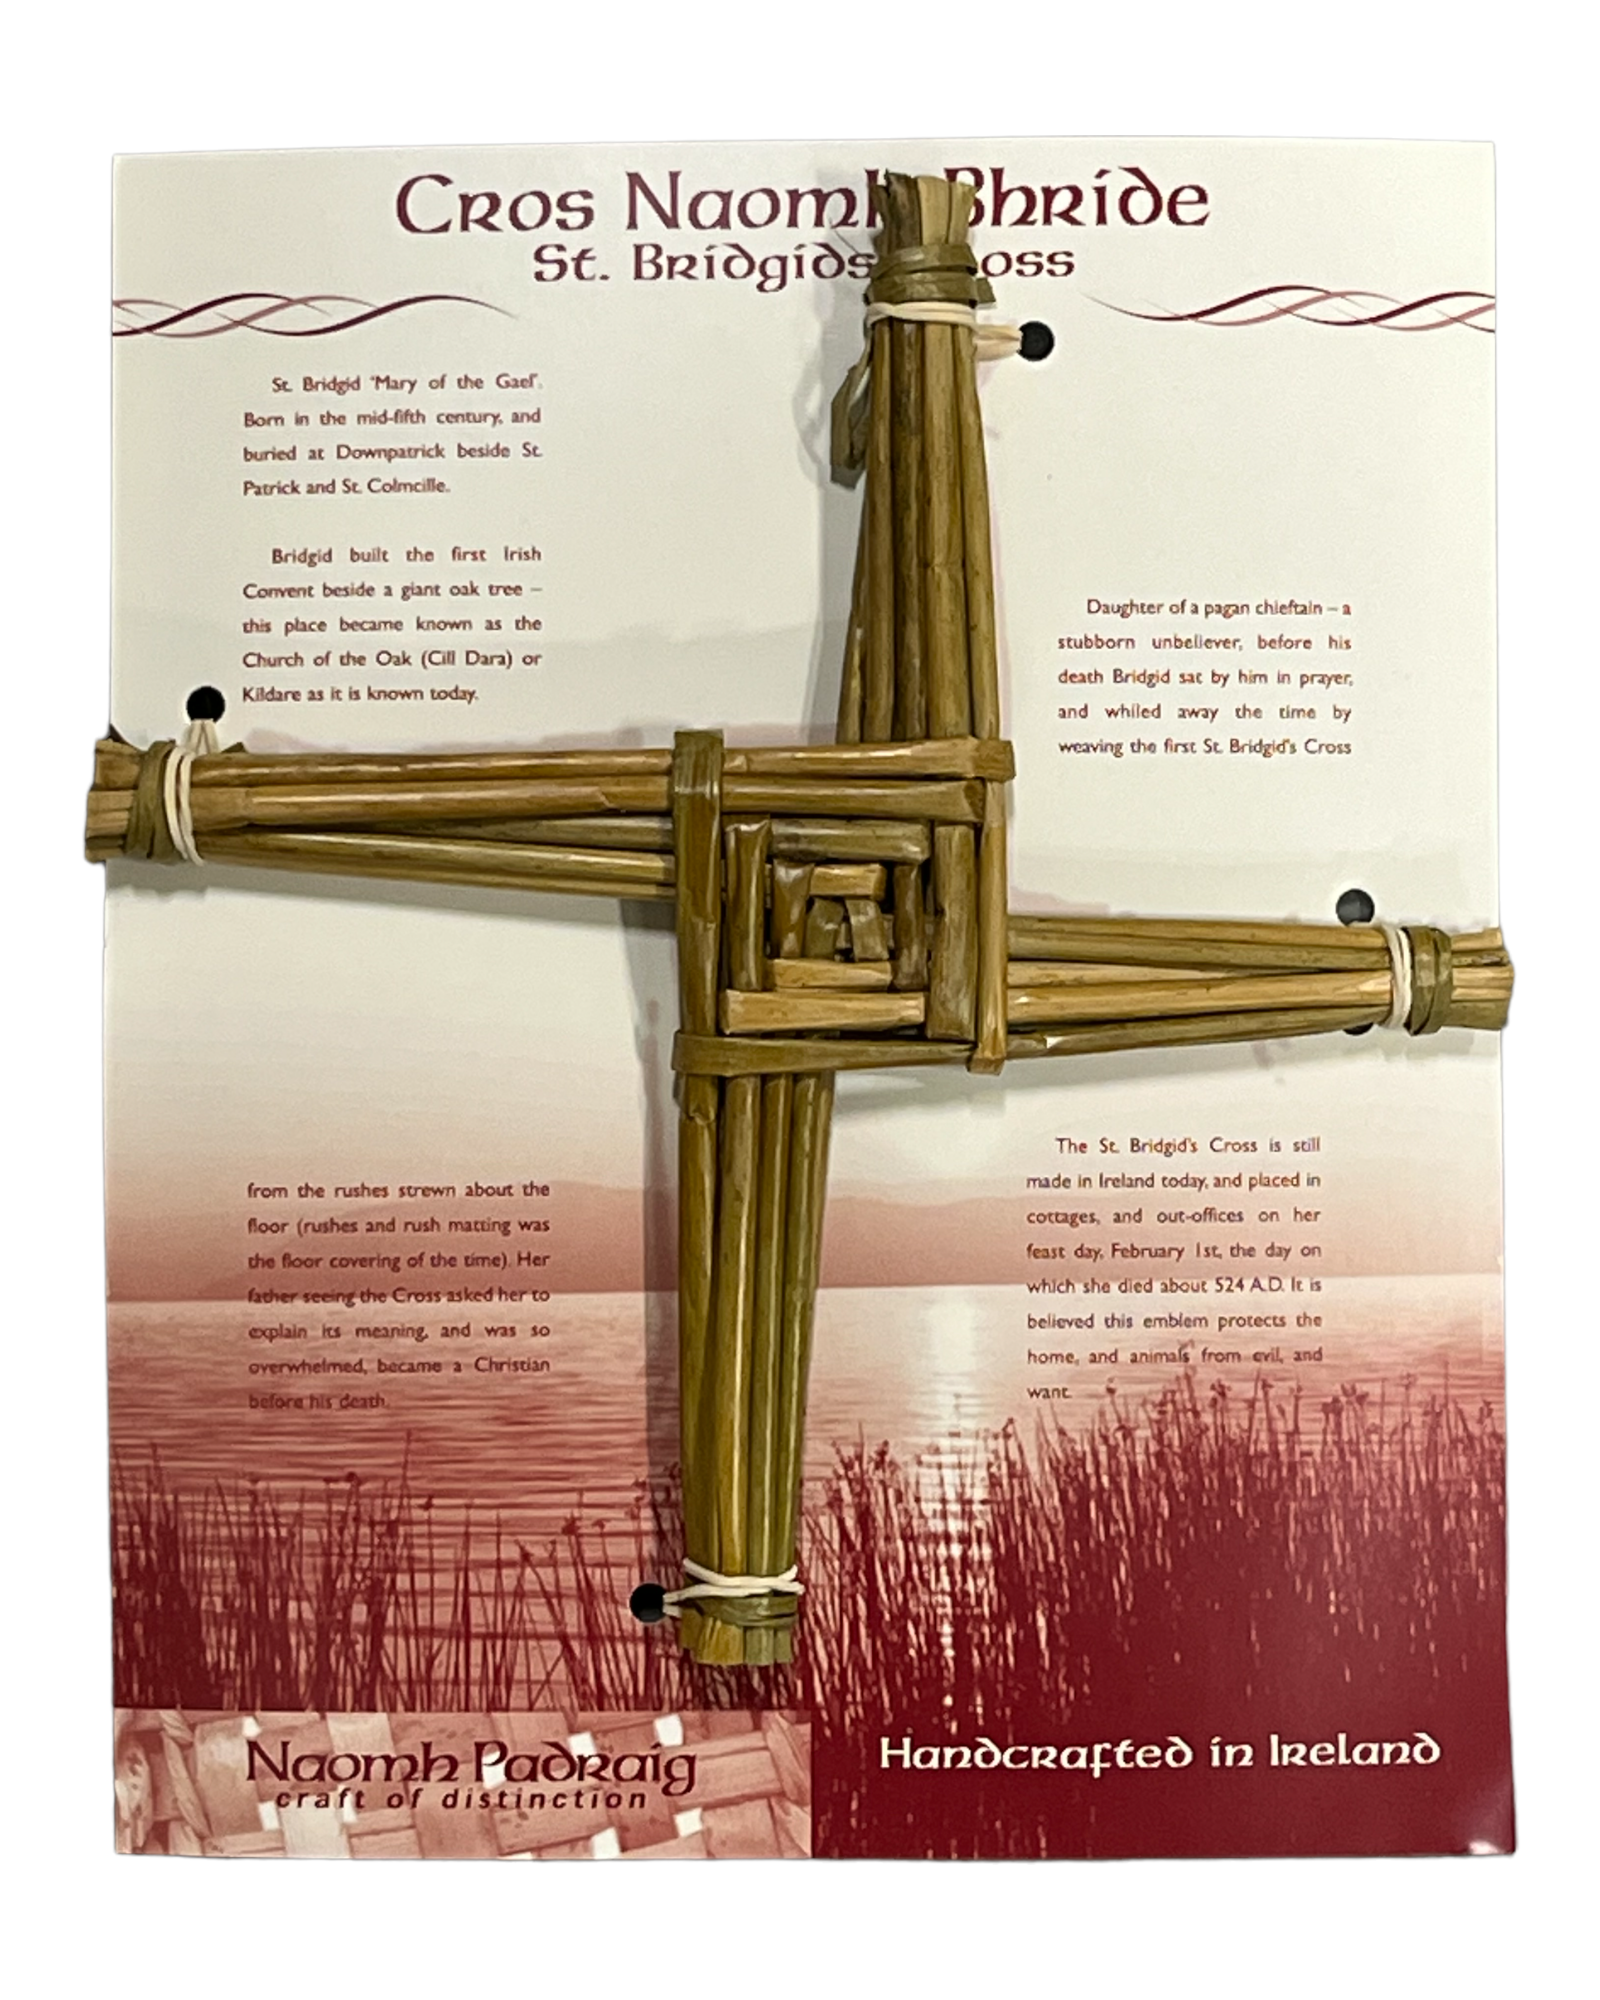 Large St. Brigid's Cross on History and Information Card